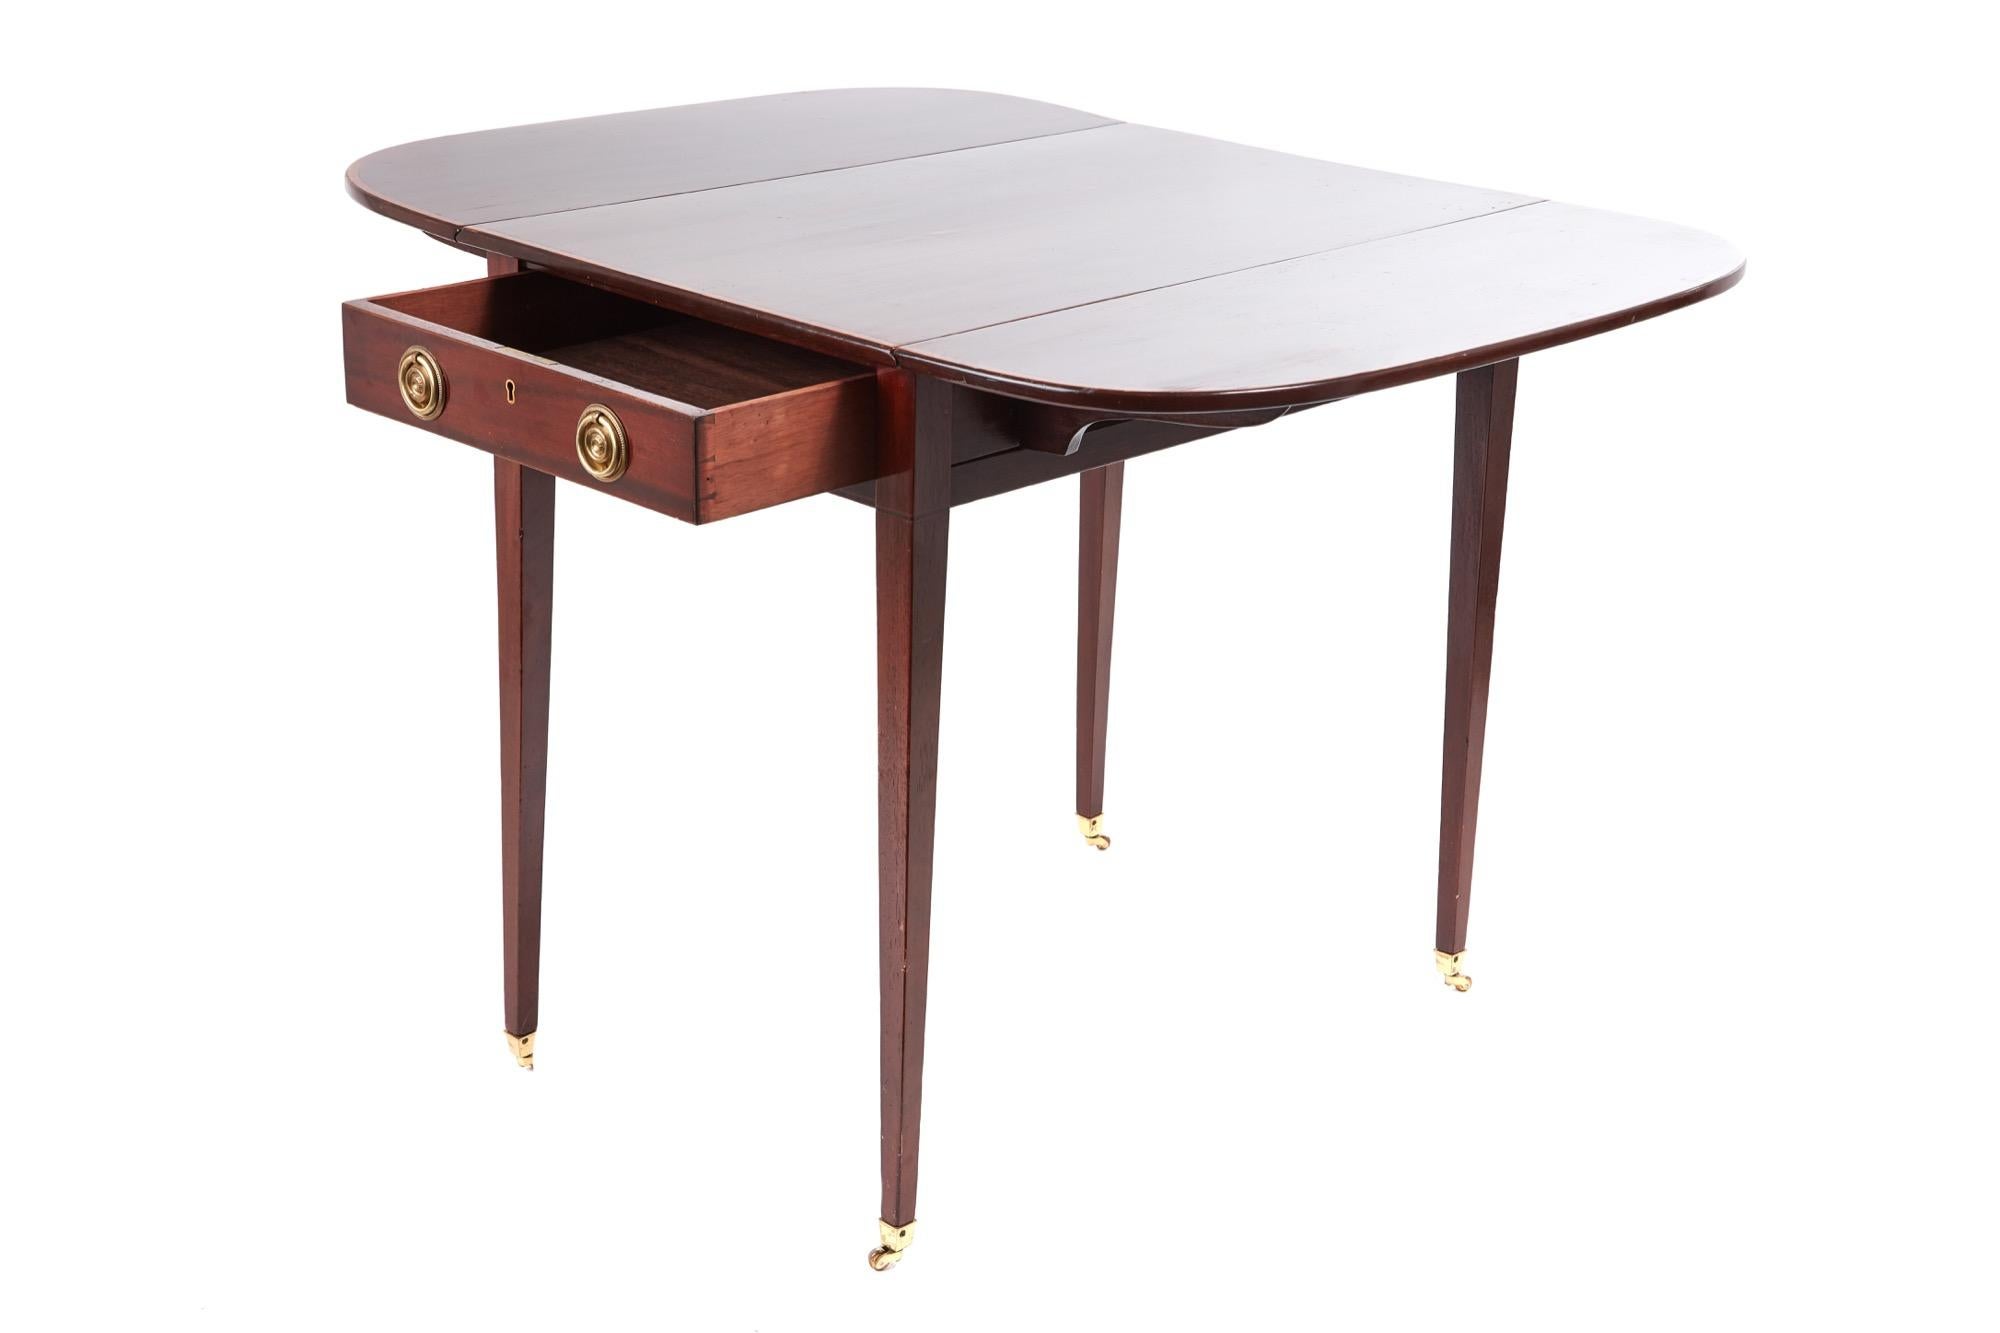 Georgian antique mahogany Pembroke table with a beautiful mahogany top, two drop leaves, crossbanded in satinwood, one frieze drawer with original brass handles, standing on four elegant square tapering legs with original brass castors.

WORLDWIDE